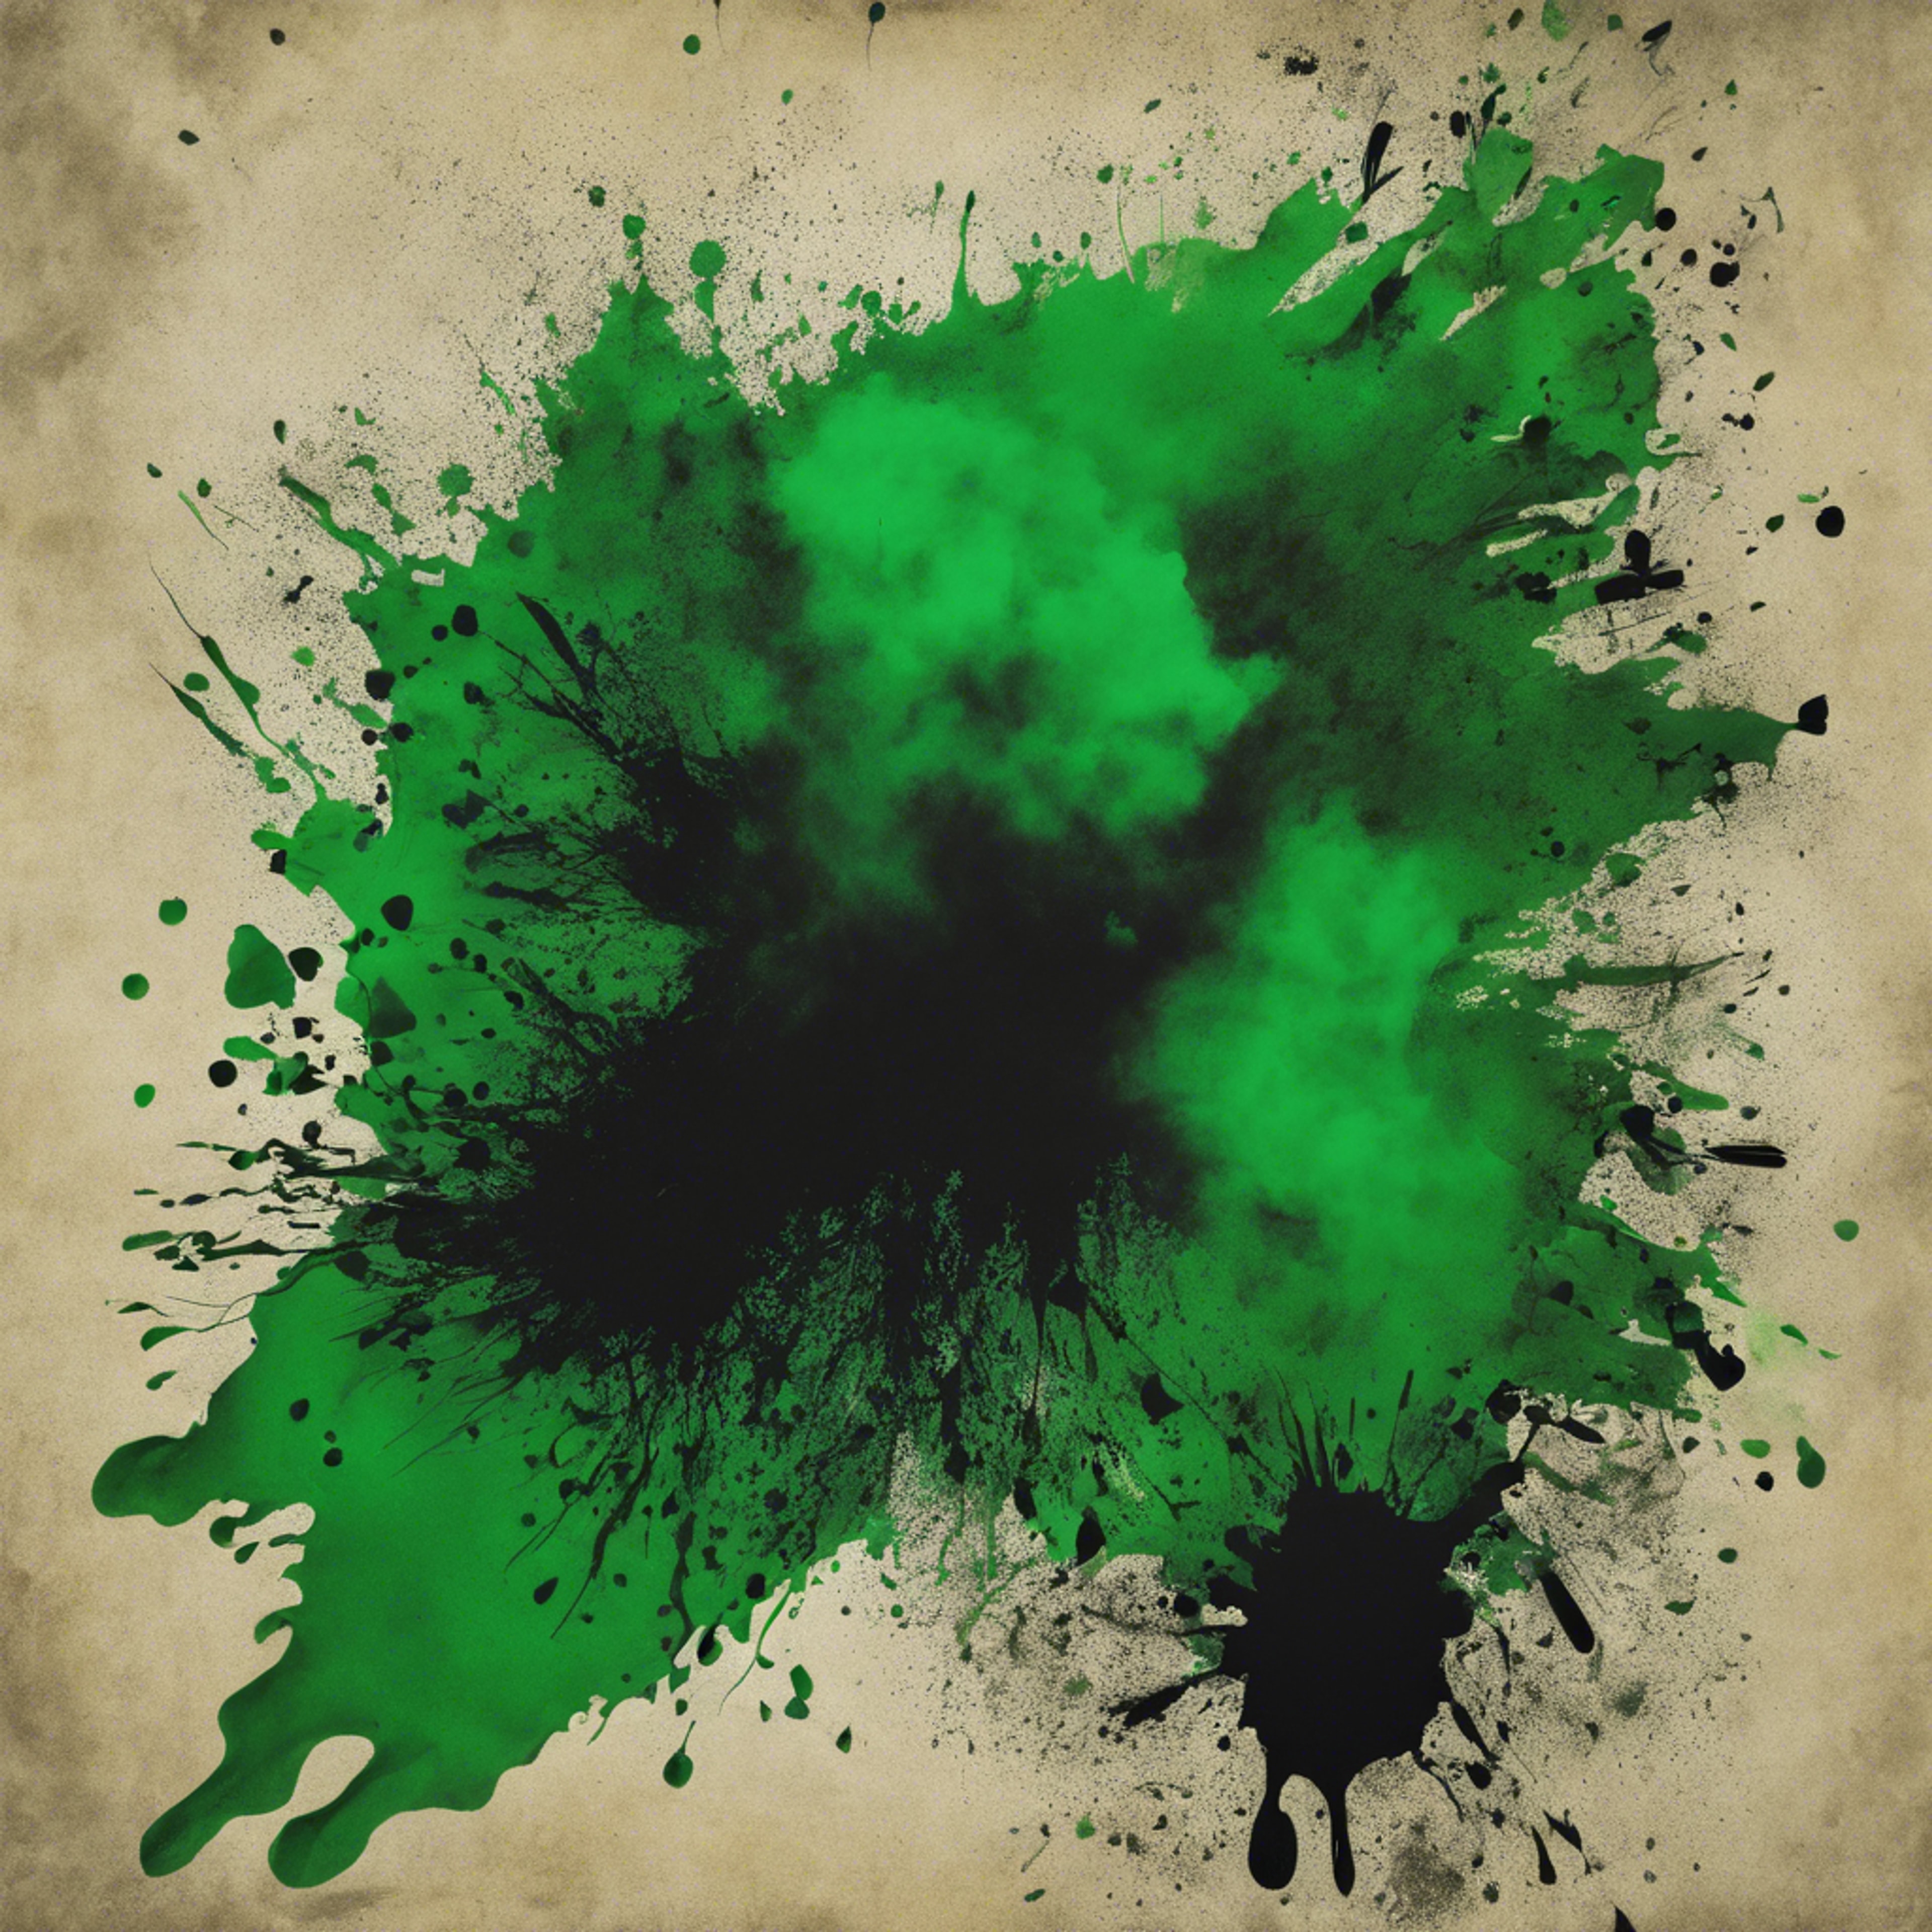 Black ink falling onto a green parchment in a gothic study. Hintergrund[1b59450119294094857f]